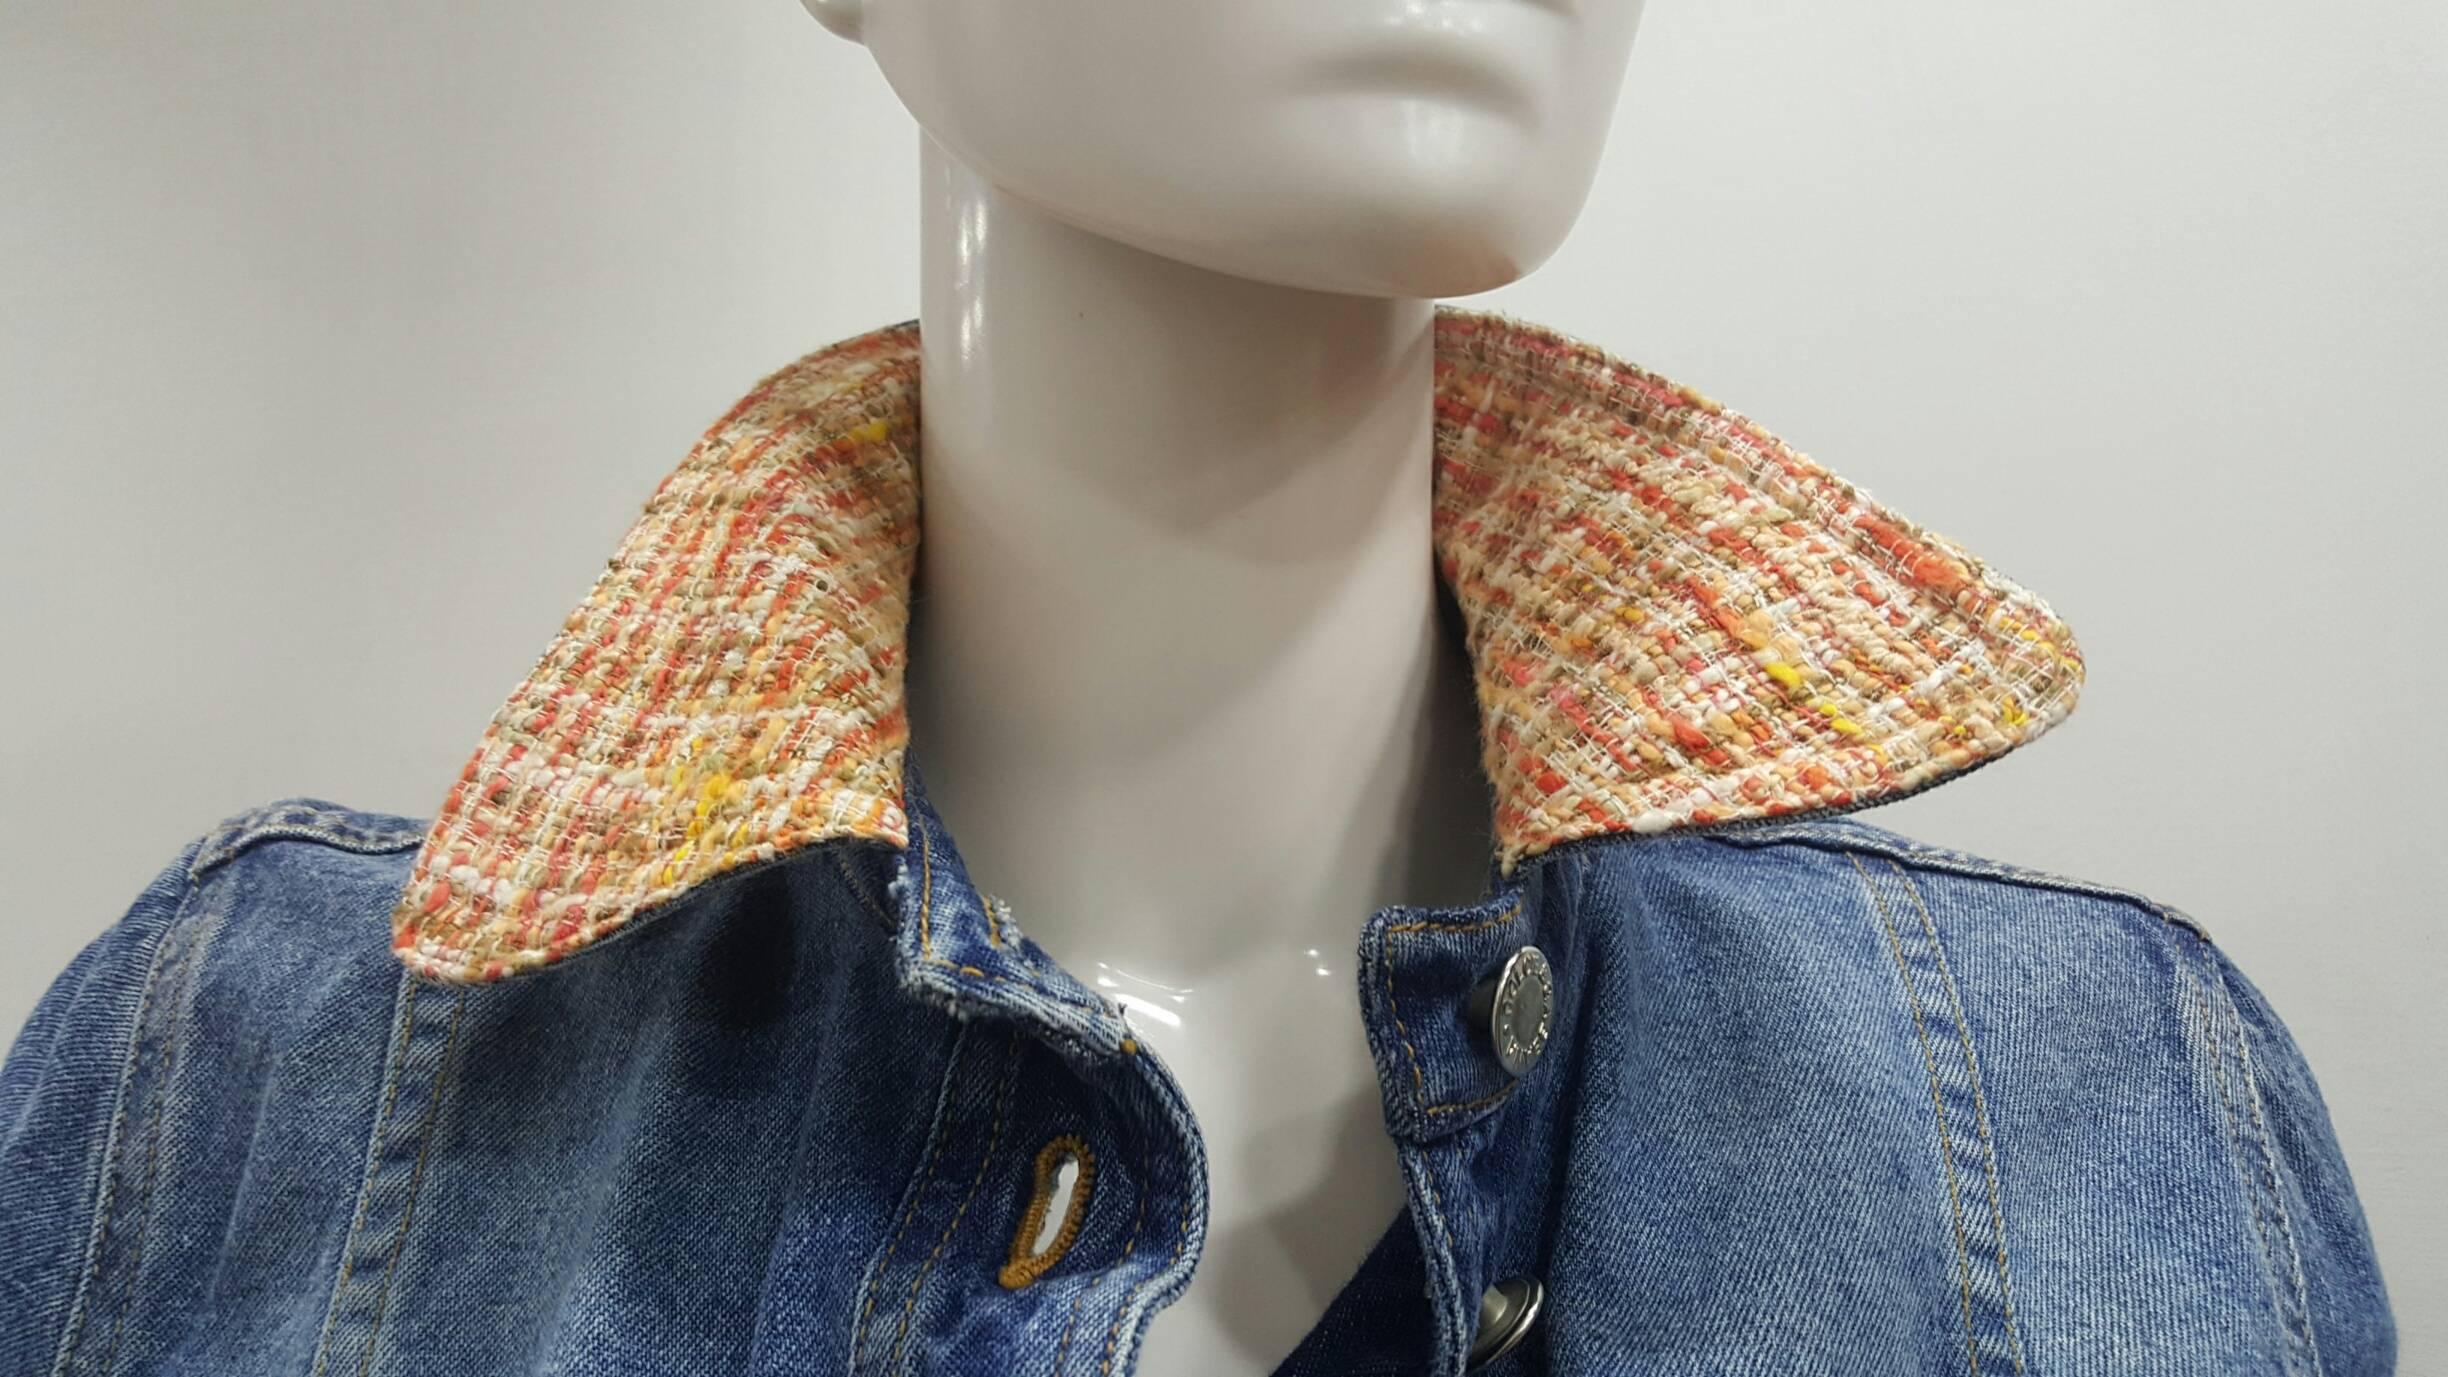 1990s Dolce & Gabbana Denim Jacket
Italian size range 42
Composition 90% cotton 4% viscose 3% wool 2% Silk 1% Nylon
Collar and pockets totally tweed
total lenght: 58 cm back
45 cm front

bust: 90 cm 